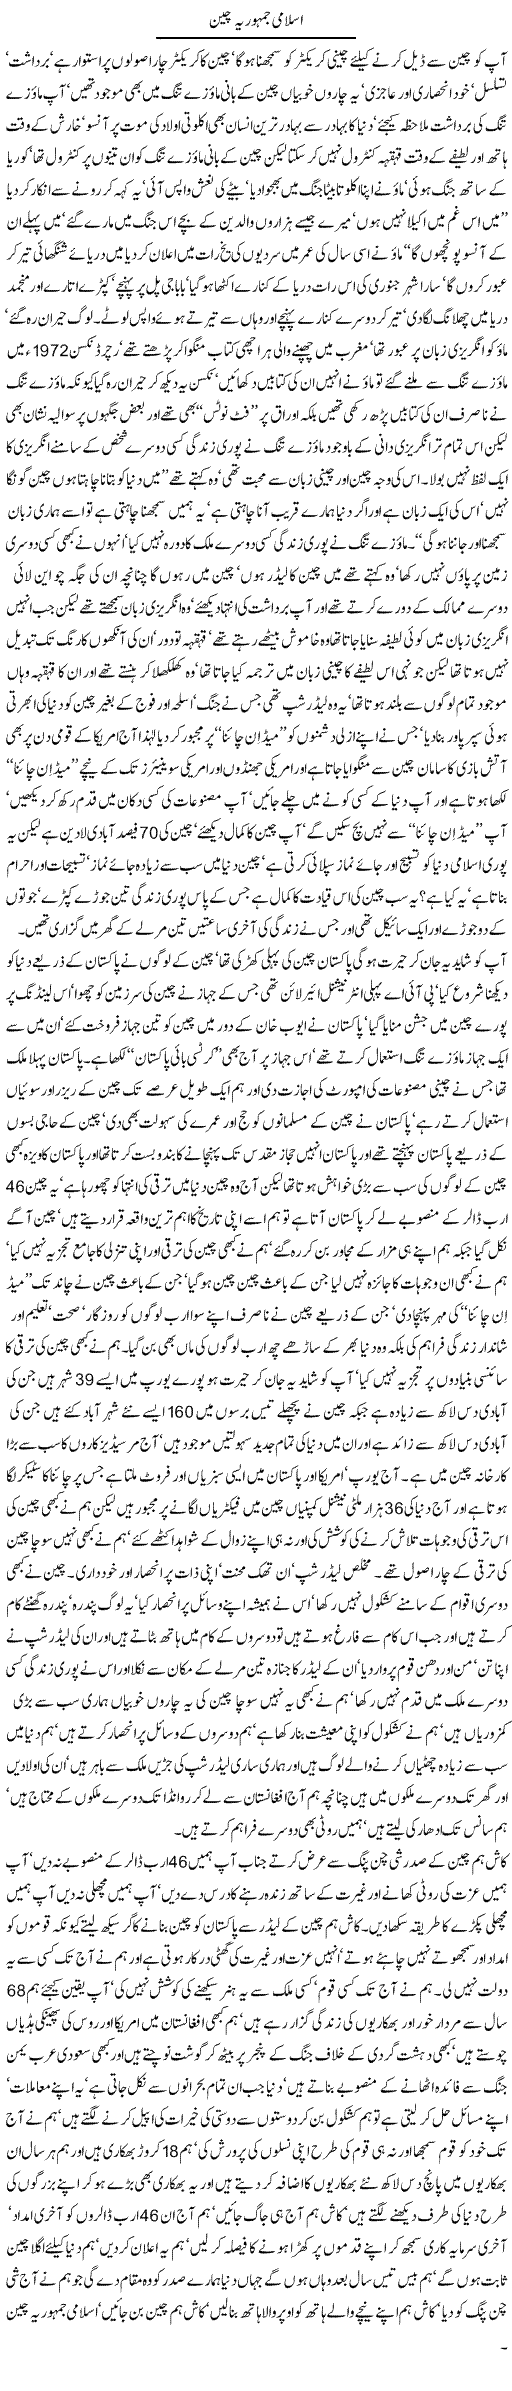 Islami Jhamhoria Cheen by Javed Chaudhry